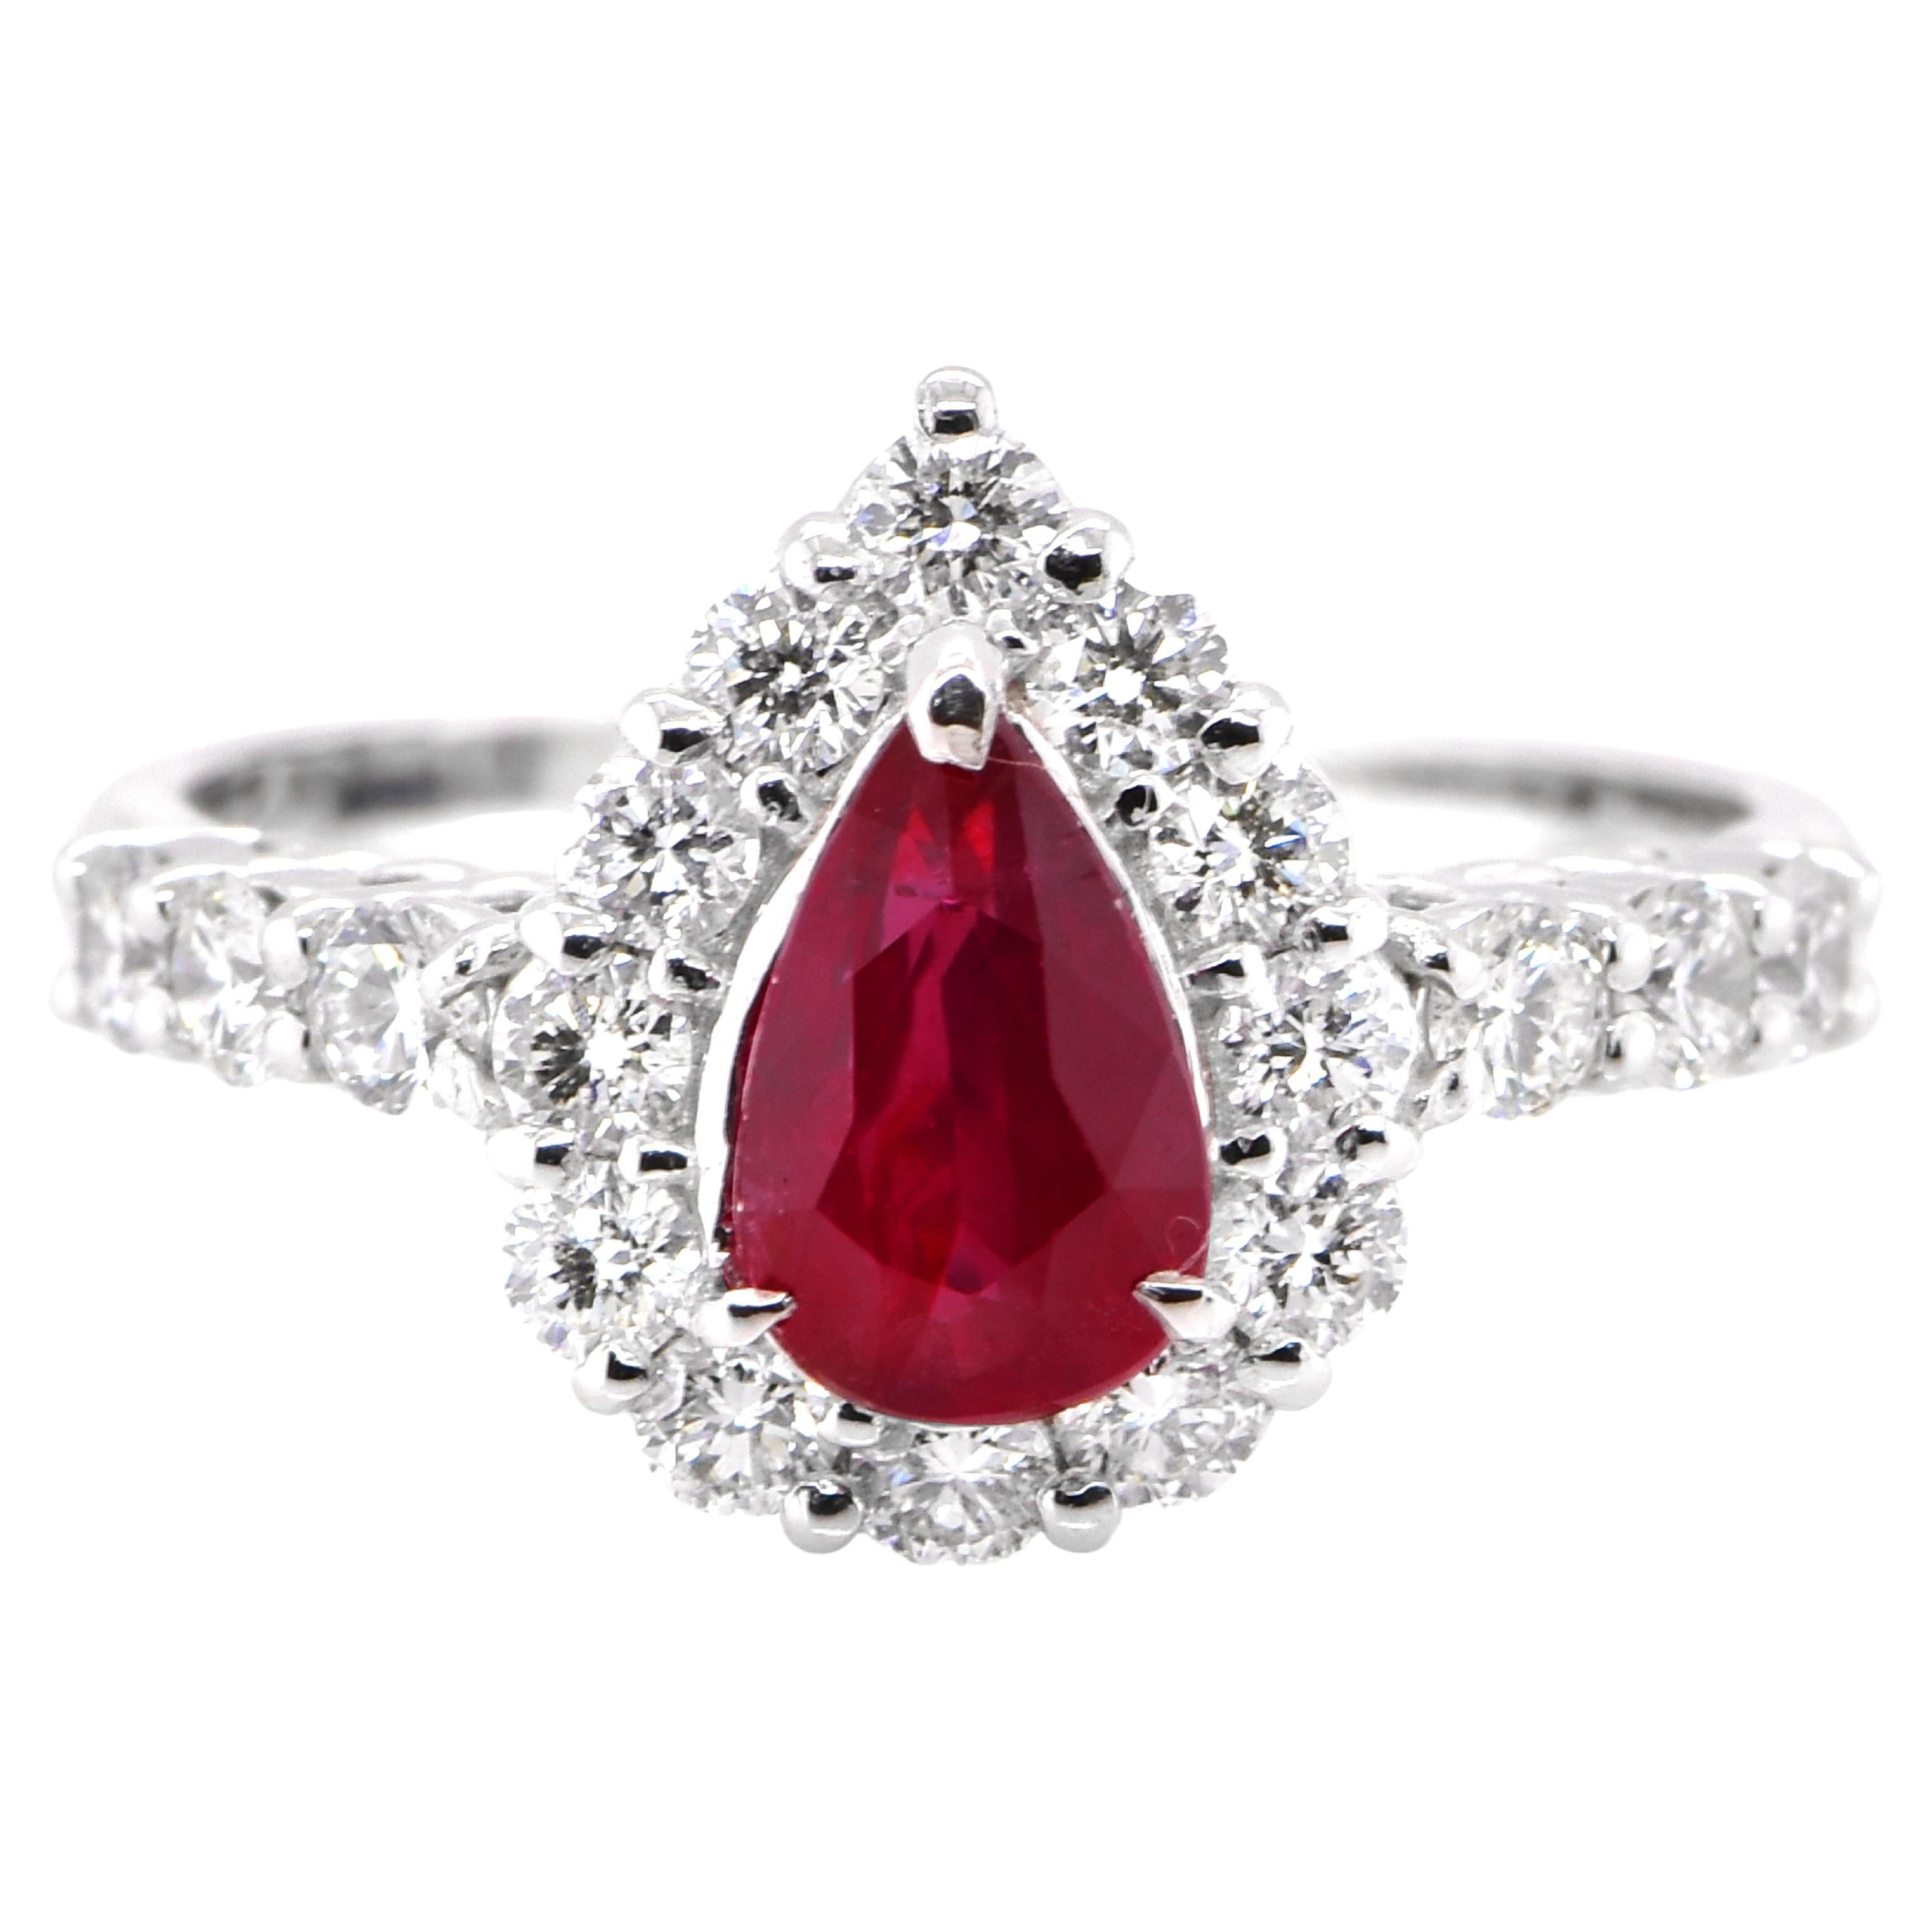 GIA Certified 1.08 Carat Unheated Ruby and Diamond Ring set in Platinum